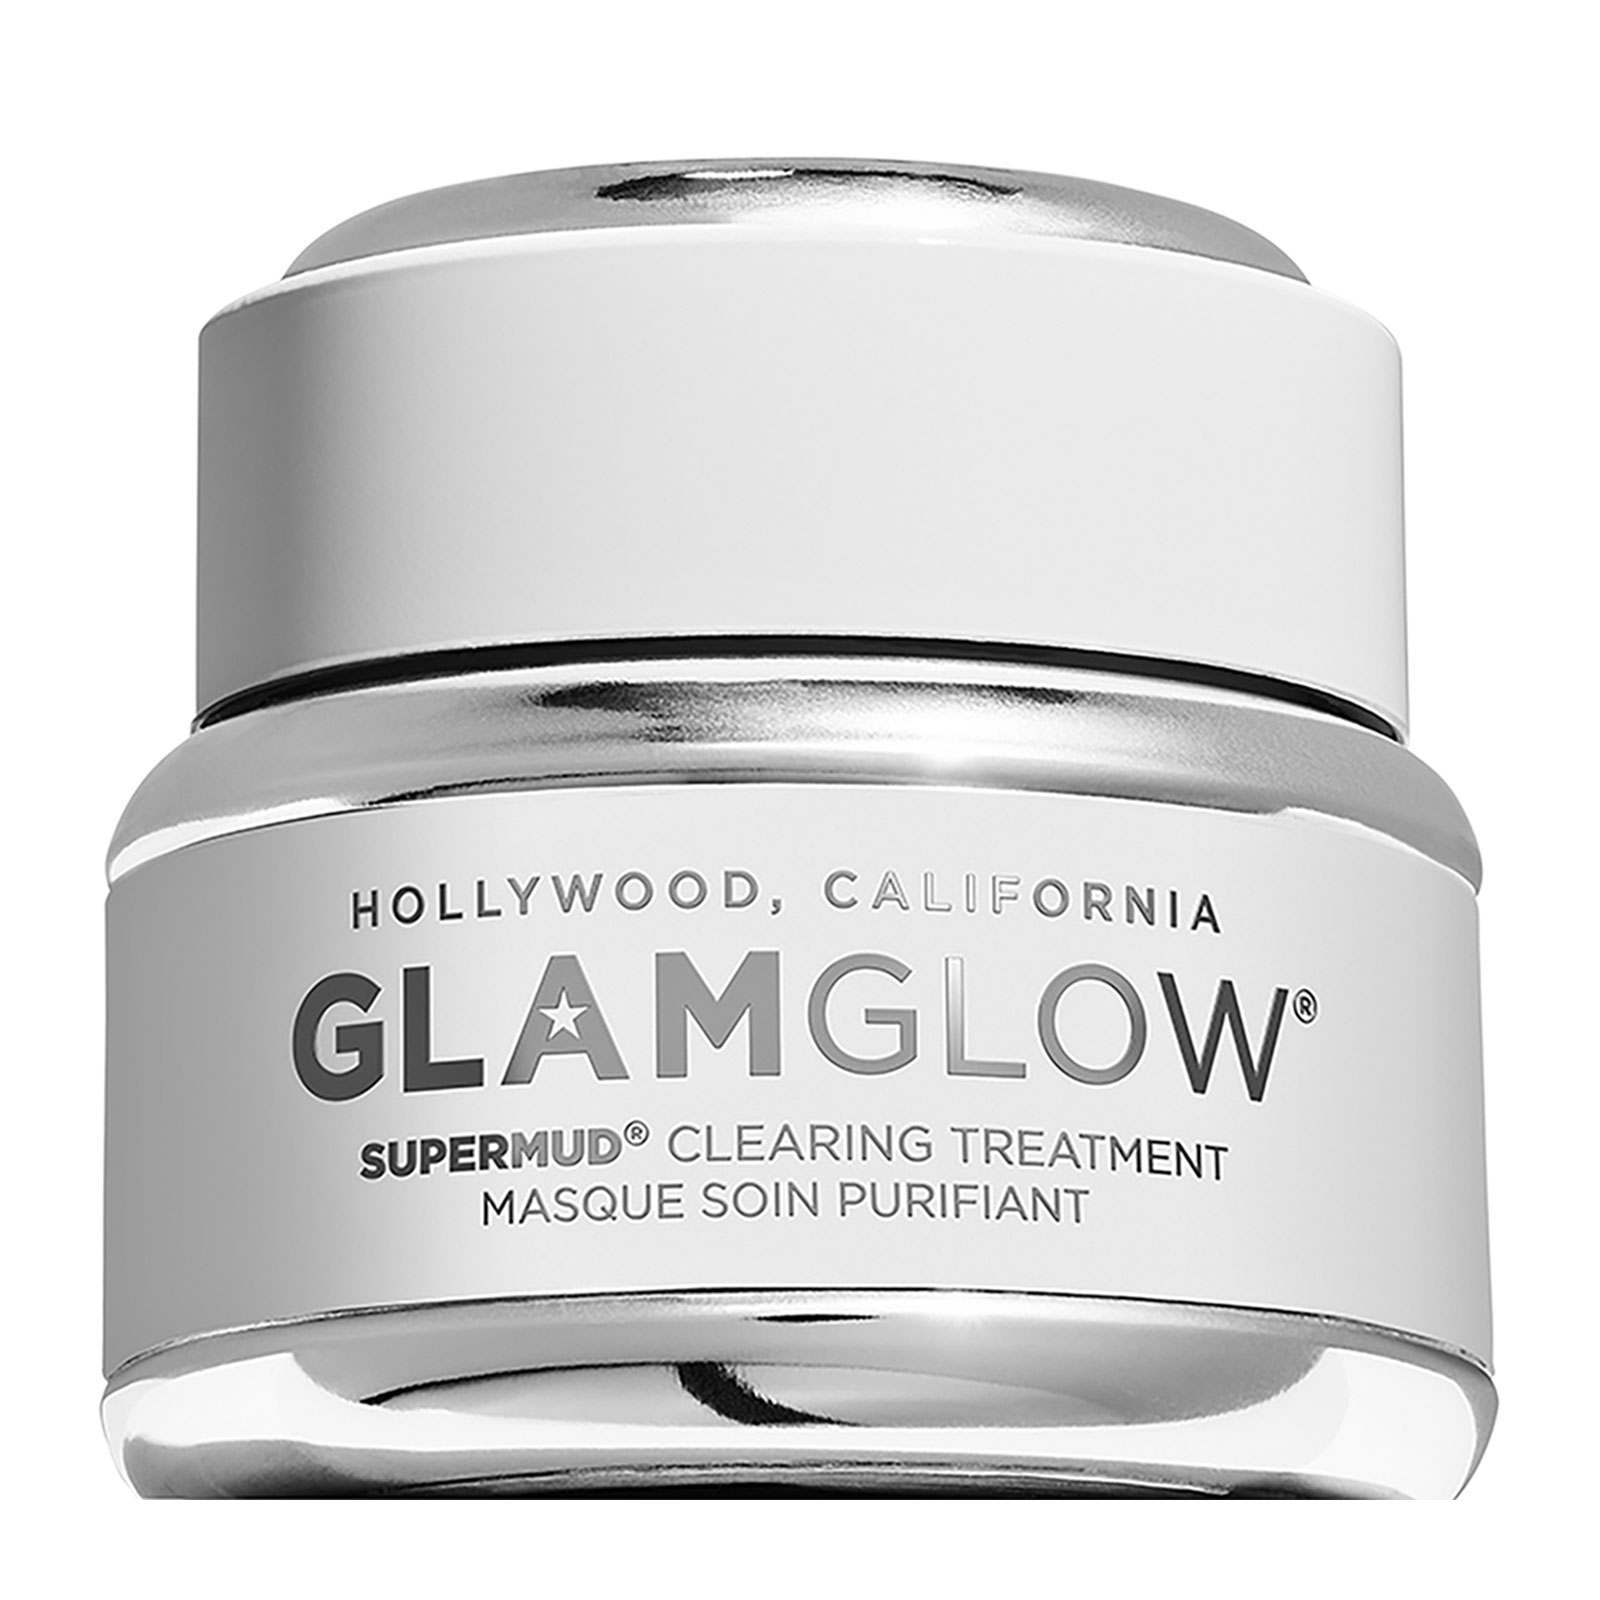 GLAMGLOW SUPERMUD� CLEARING TREATMENT GLAM TO GO 15g